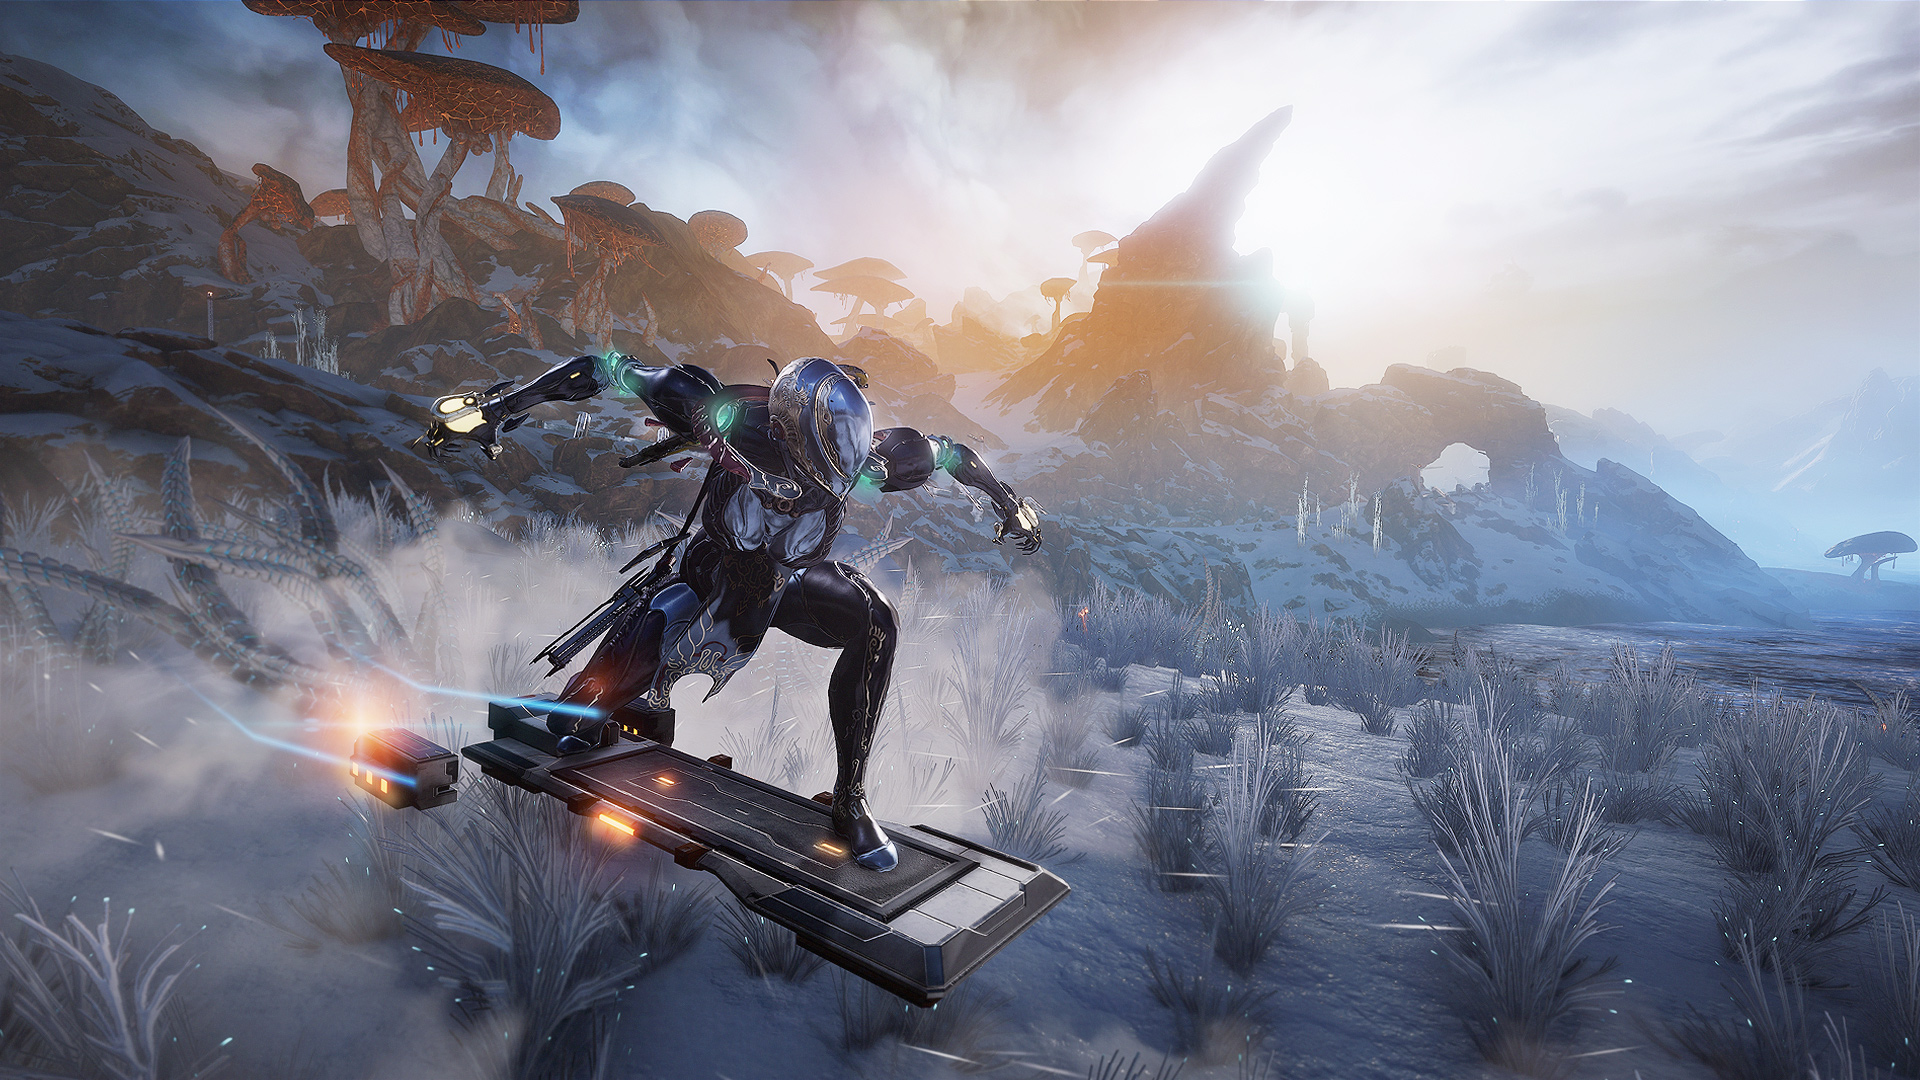 Free Steam games - Warframe - A player rides a hoverboard across an alien planet lanscape